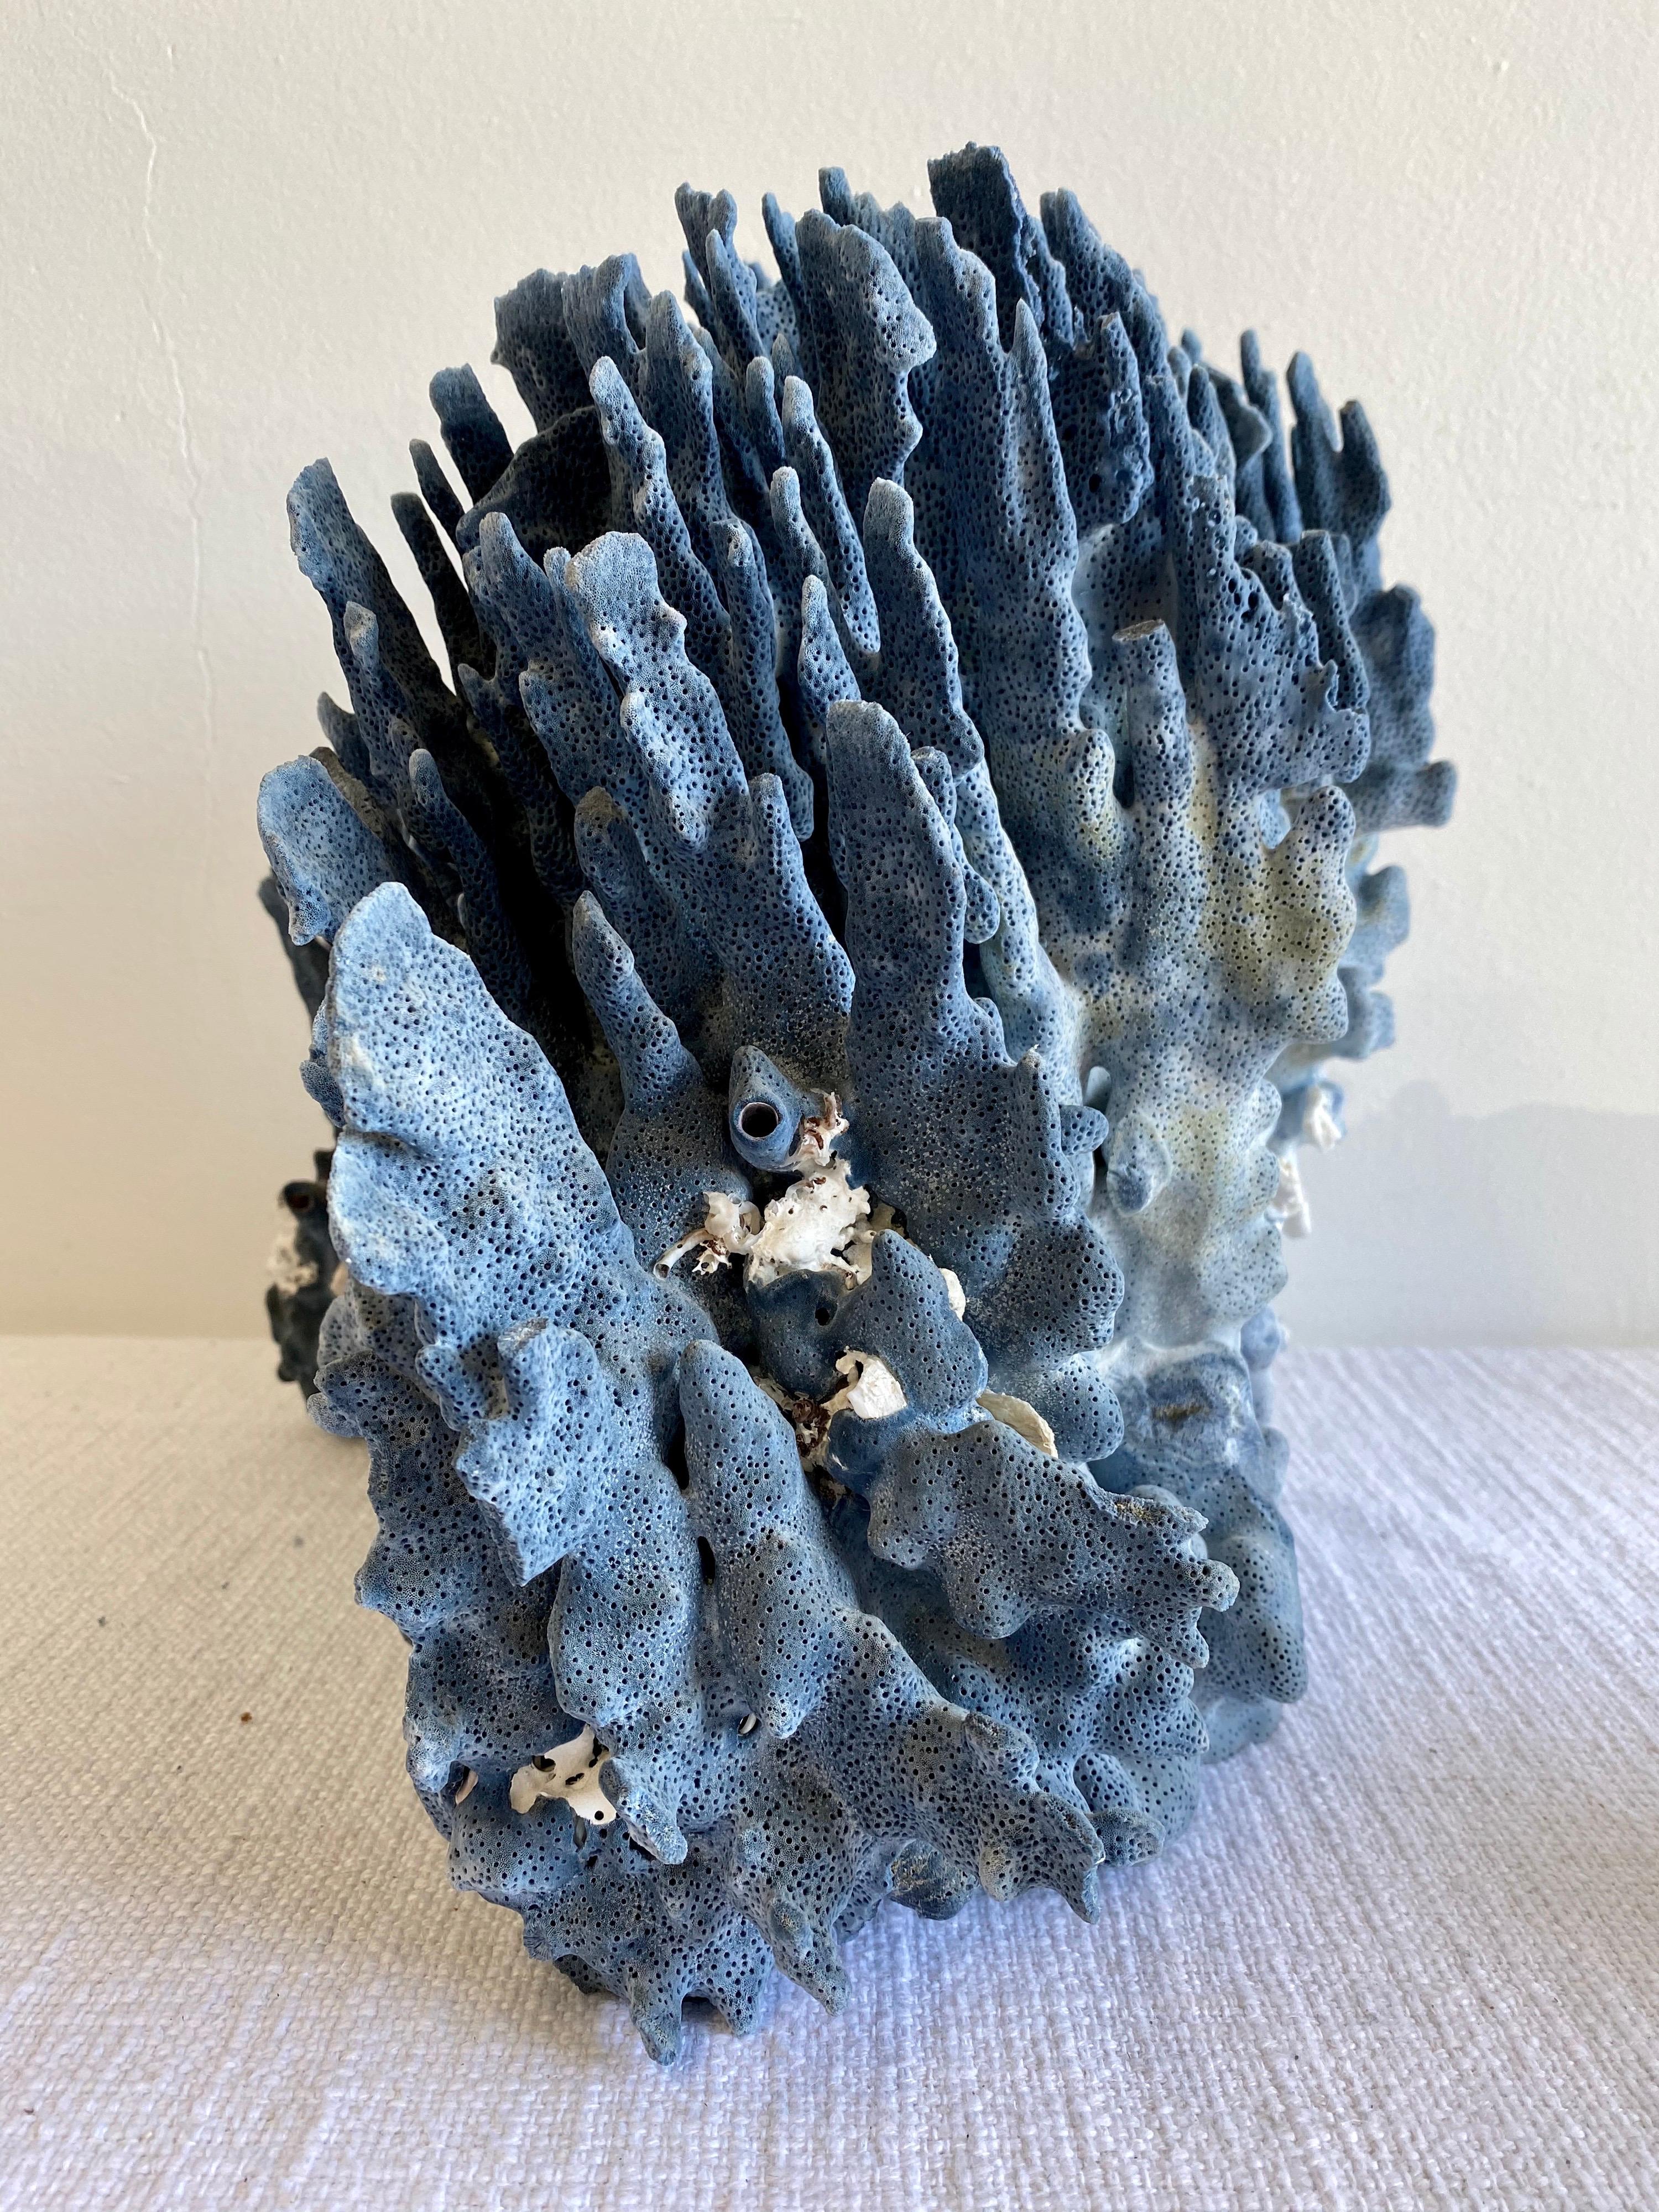 Beautiful large piece of natural colored blue coral.
This coral is real, not faux, and color is natural blue, not dyed.
Size: 18